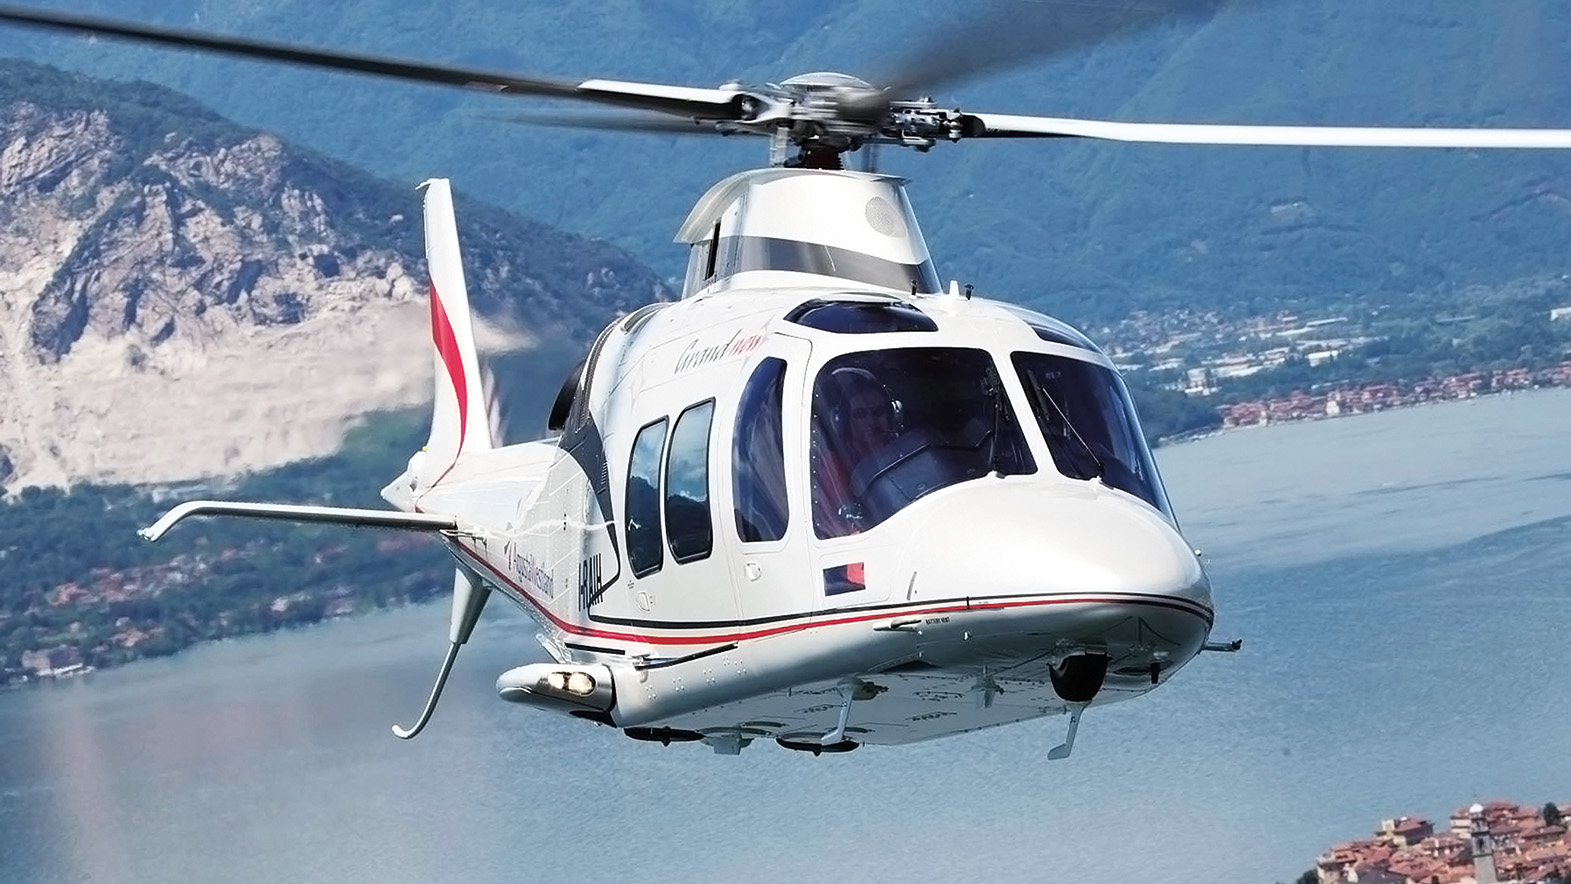 Agusta A109 Geneva to Val-d'Isere helicopter flights